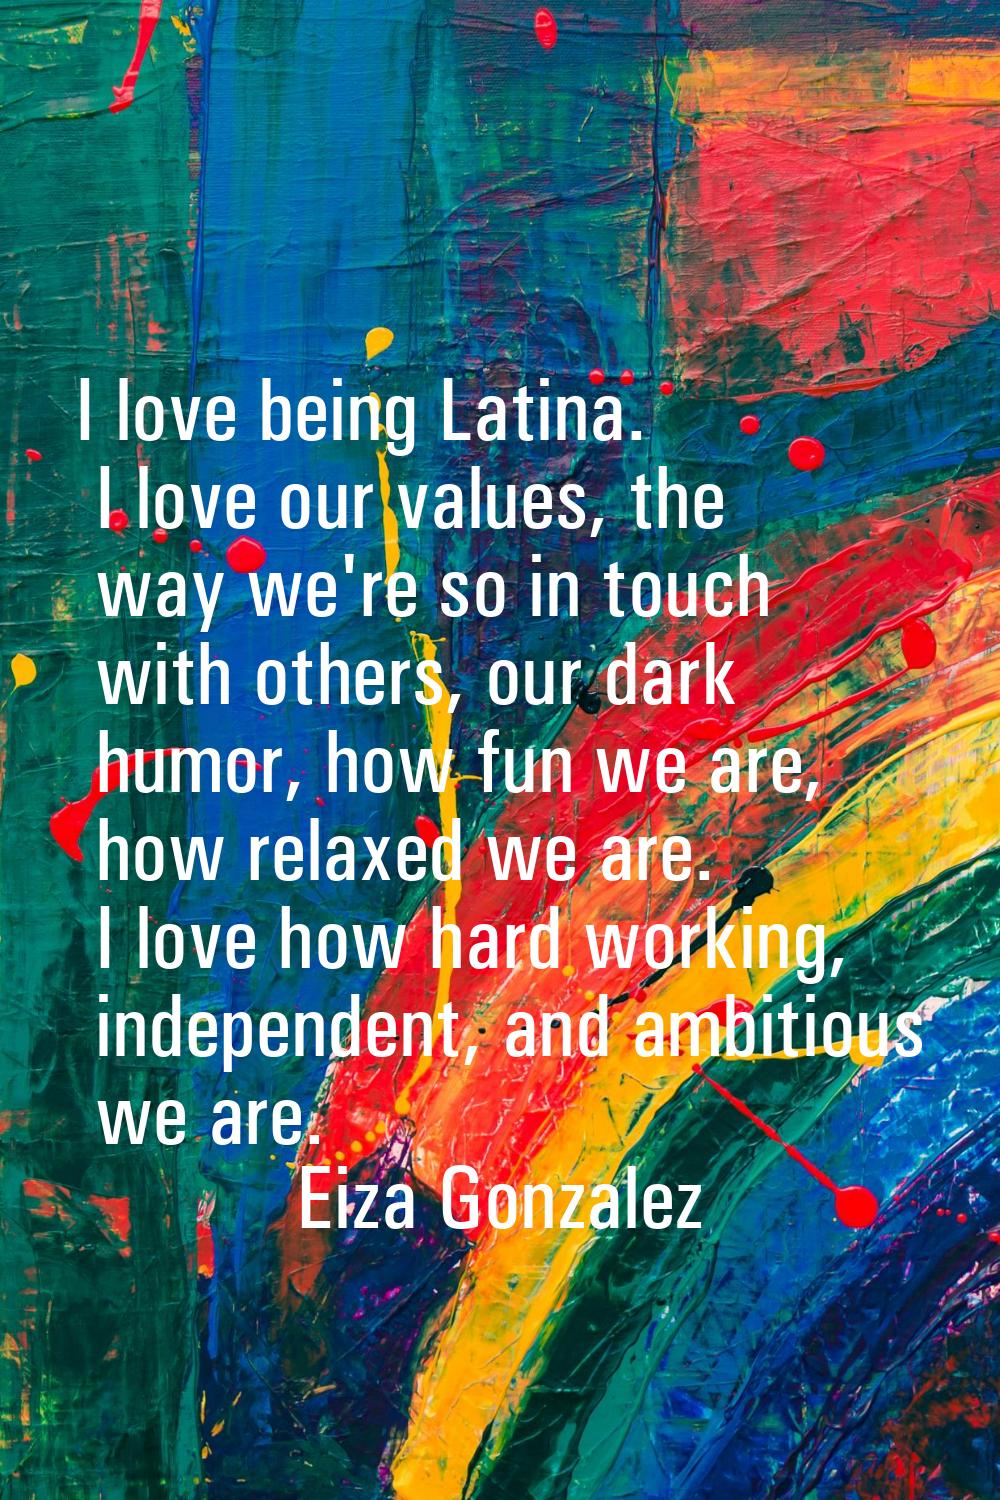 I love being Latina. I love our values, the way we're so in touch with others, our dark humor, how 